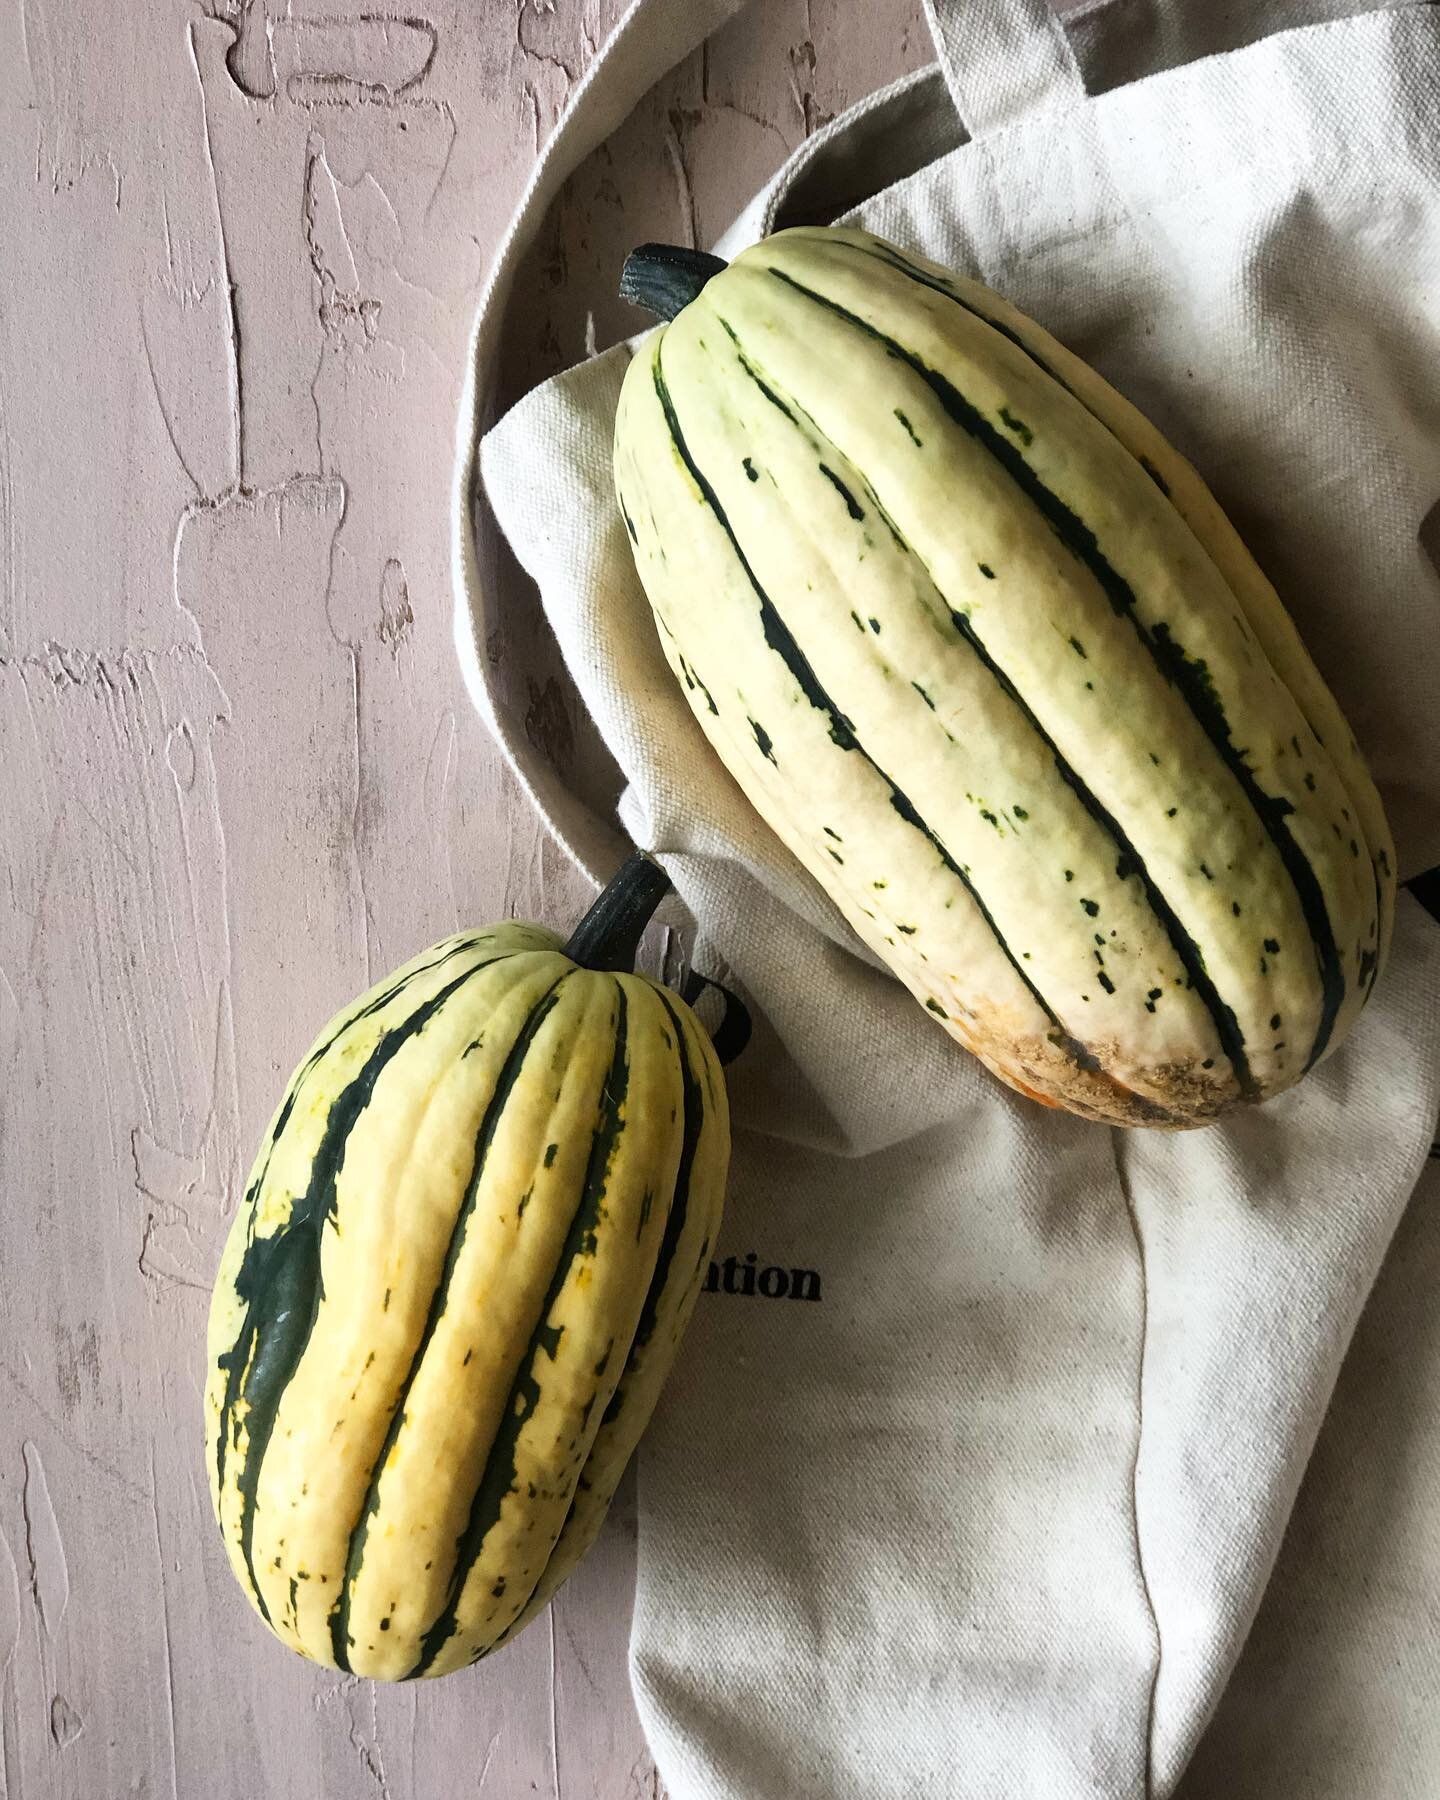 Delicata squash recipe coming soon✨
Meanwhile, go read my latest article ~5 Steps for Packing a Sustainable Lunch~ on the blog now! 🌱
.
.
.
.
#sustainedkitchen #sustainablelunchbox #lunchbox #lunchboxideas #sustainable #zerowaste #bentoboxlunch #reu